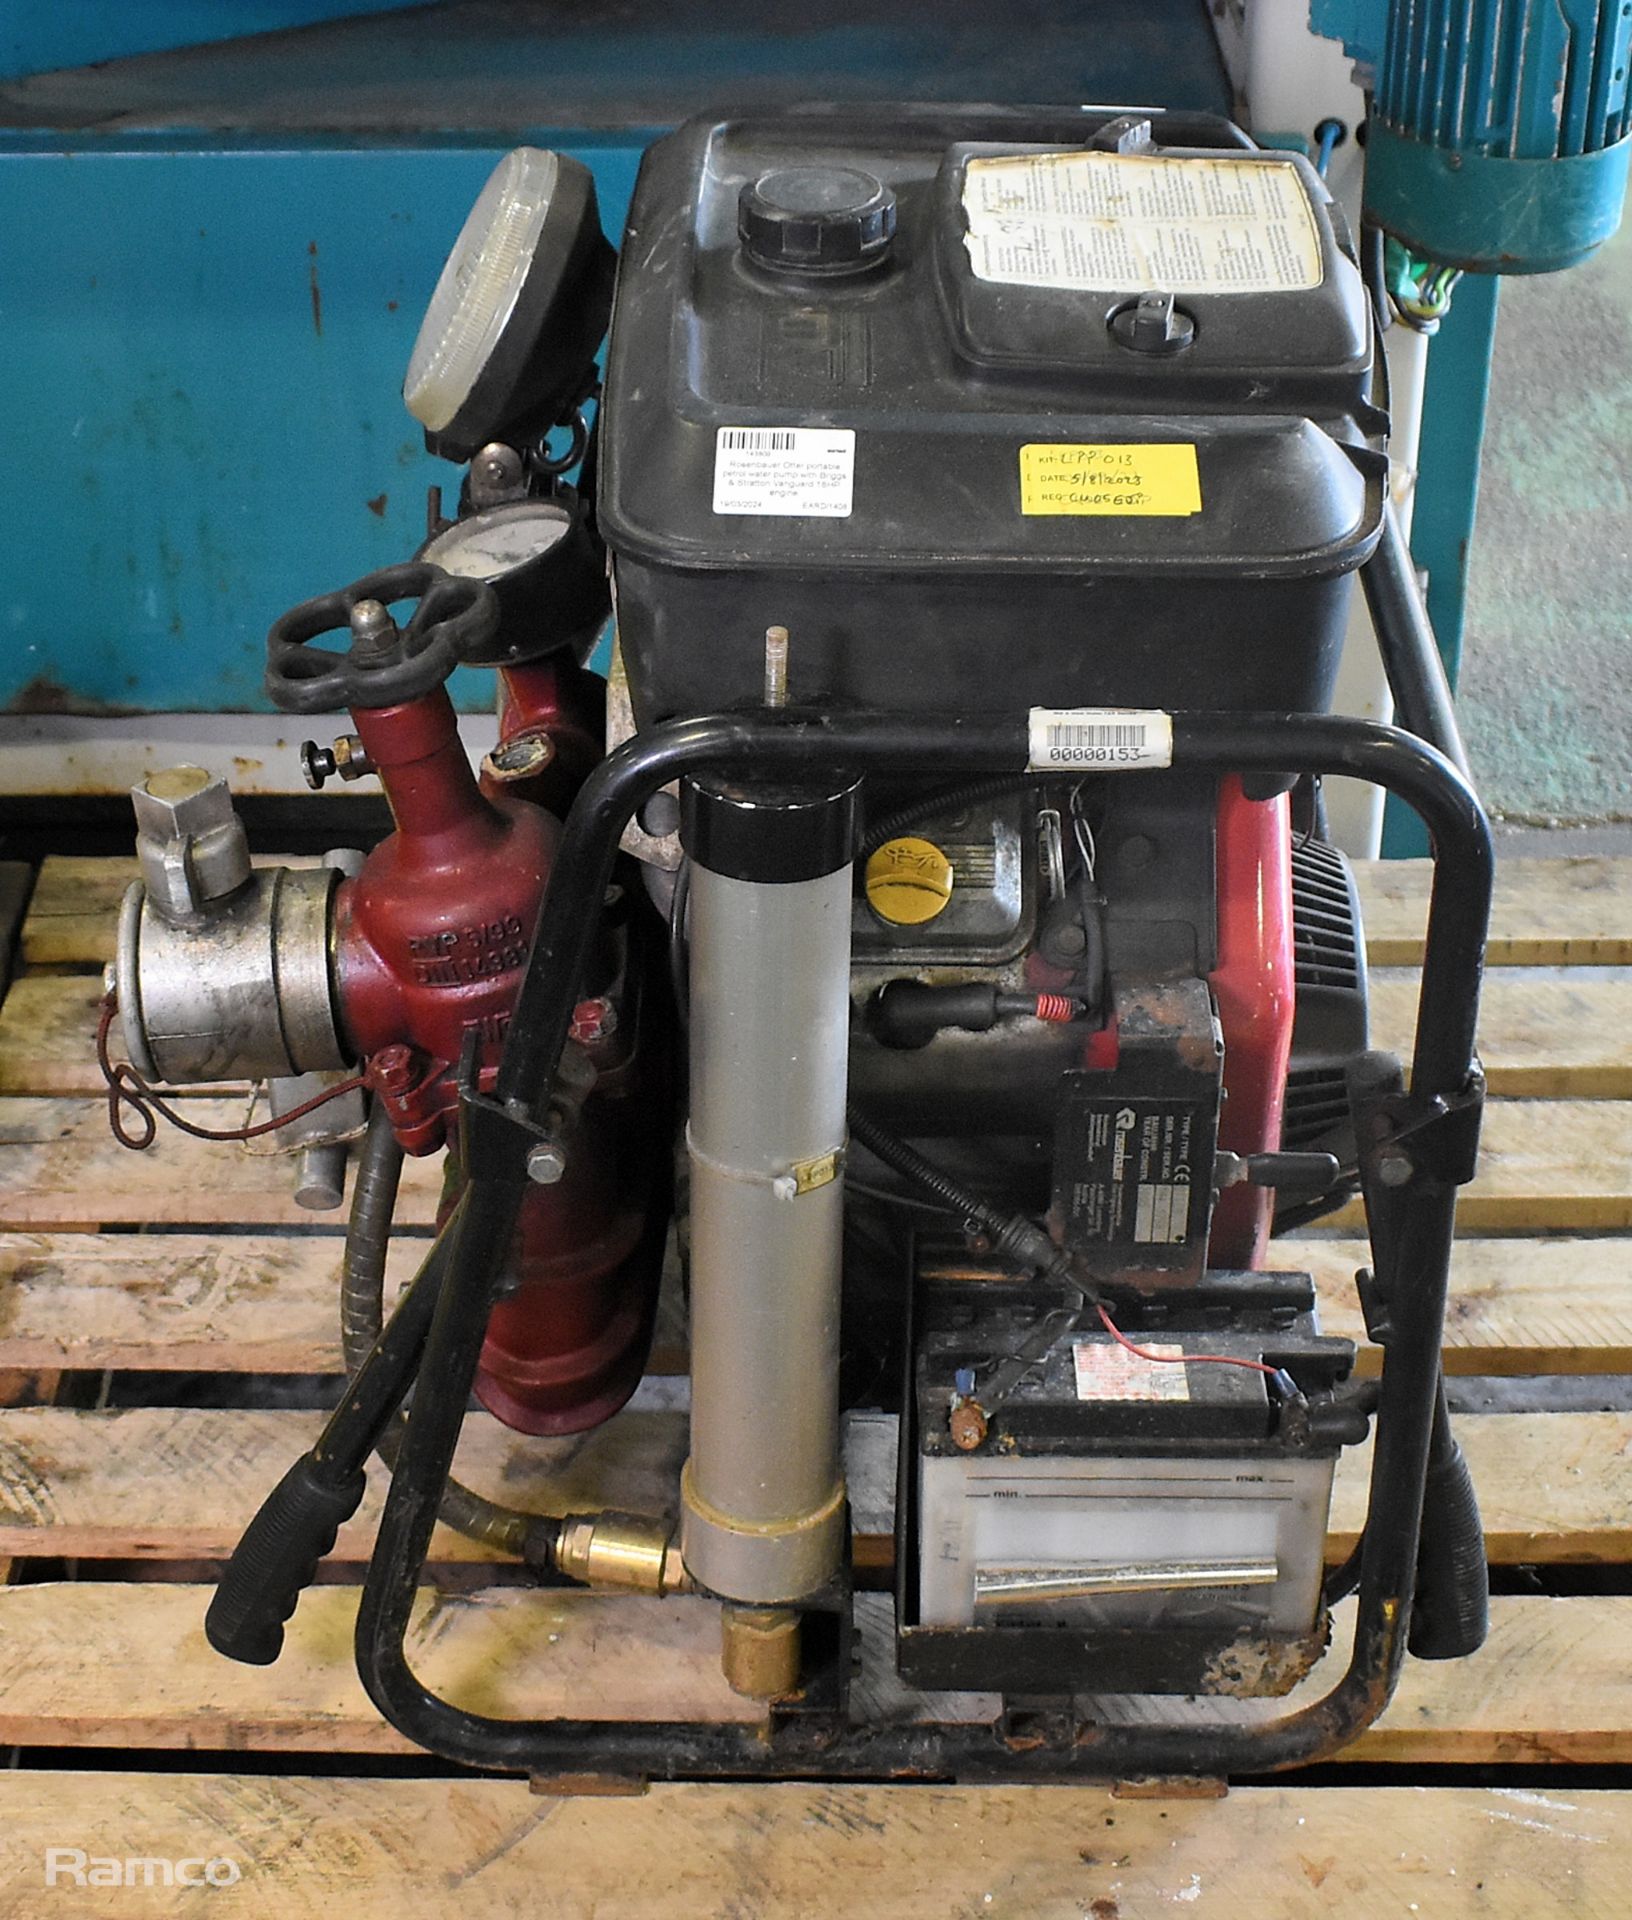 Rosenbauer Otter portable petrol water pump with Briggs & Stratton Vanguard 18HP engine - Image 9 of 12